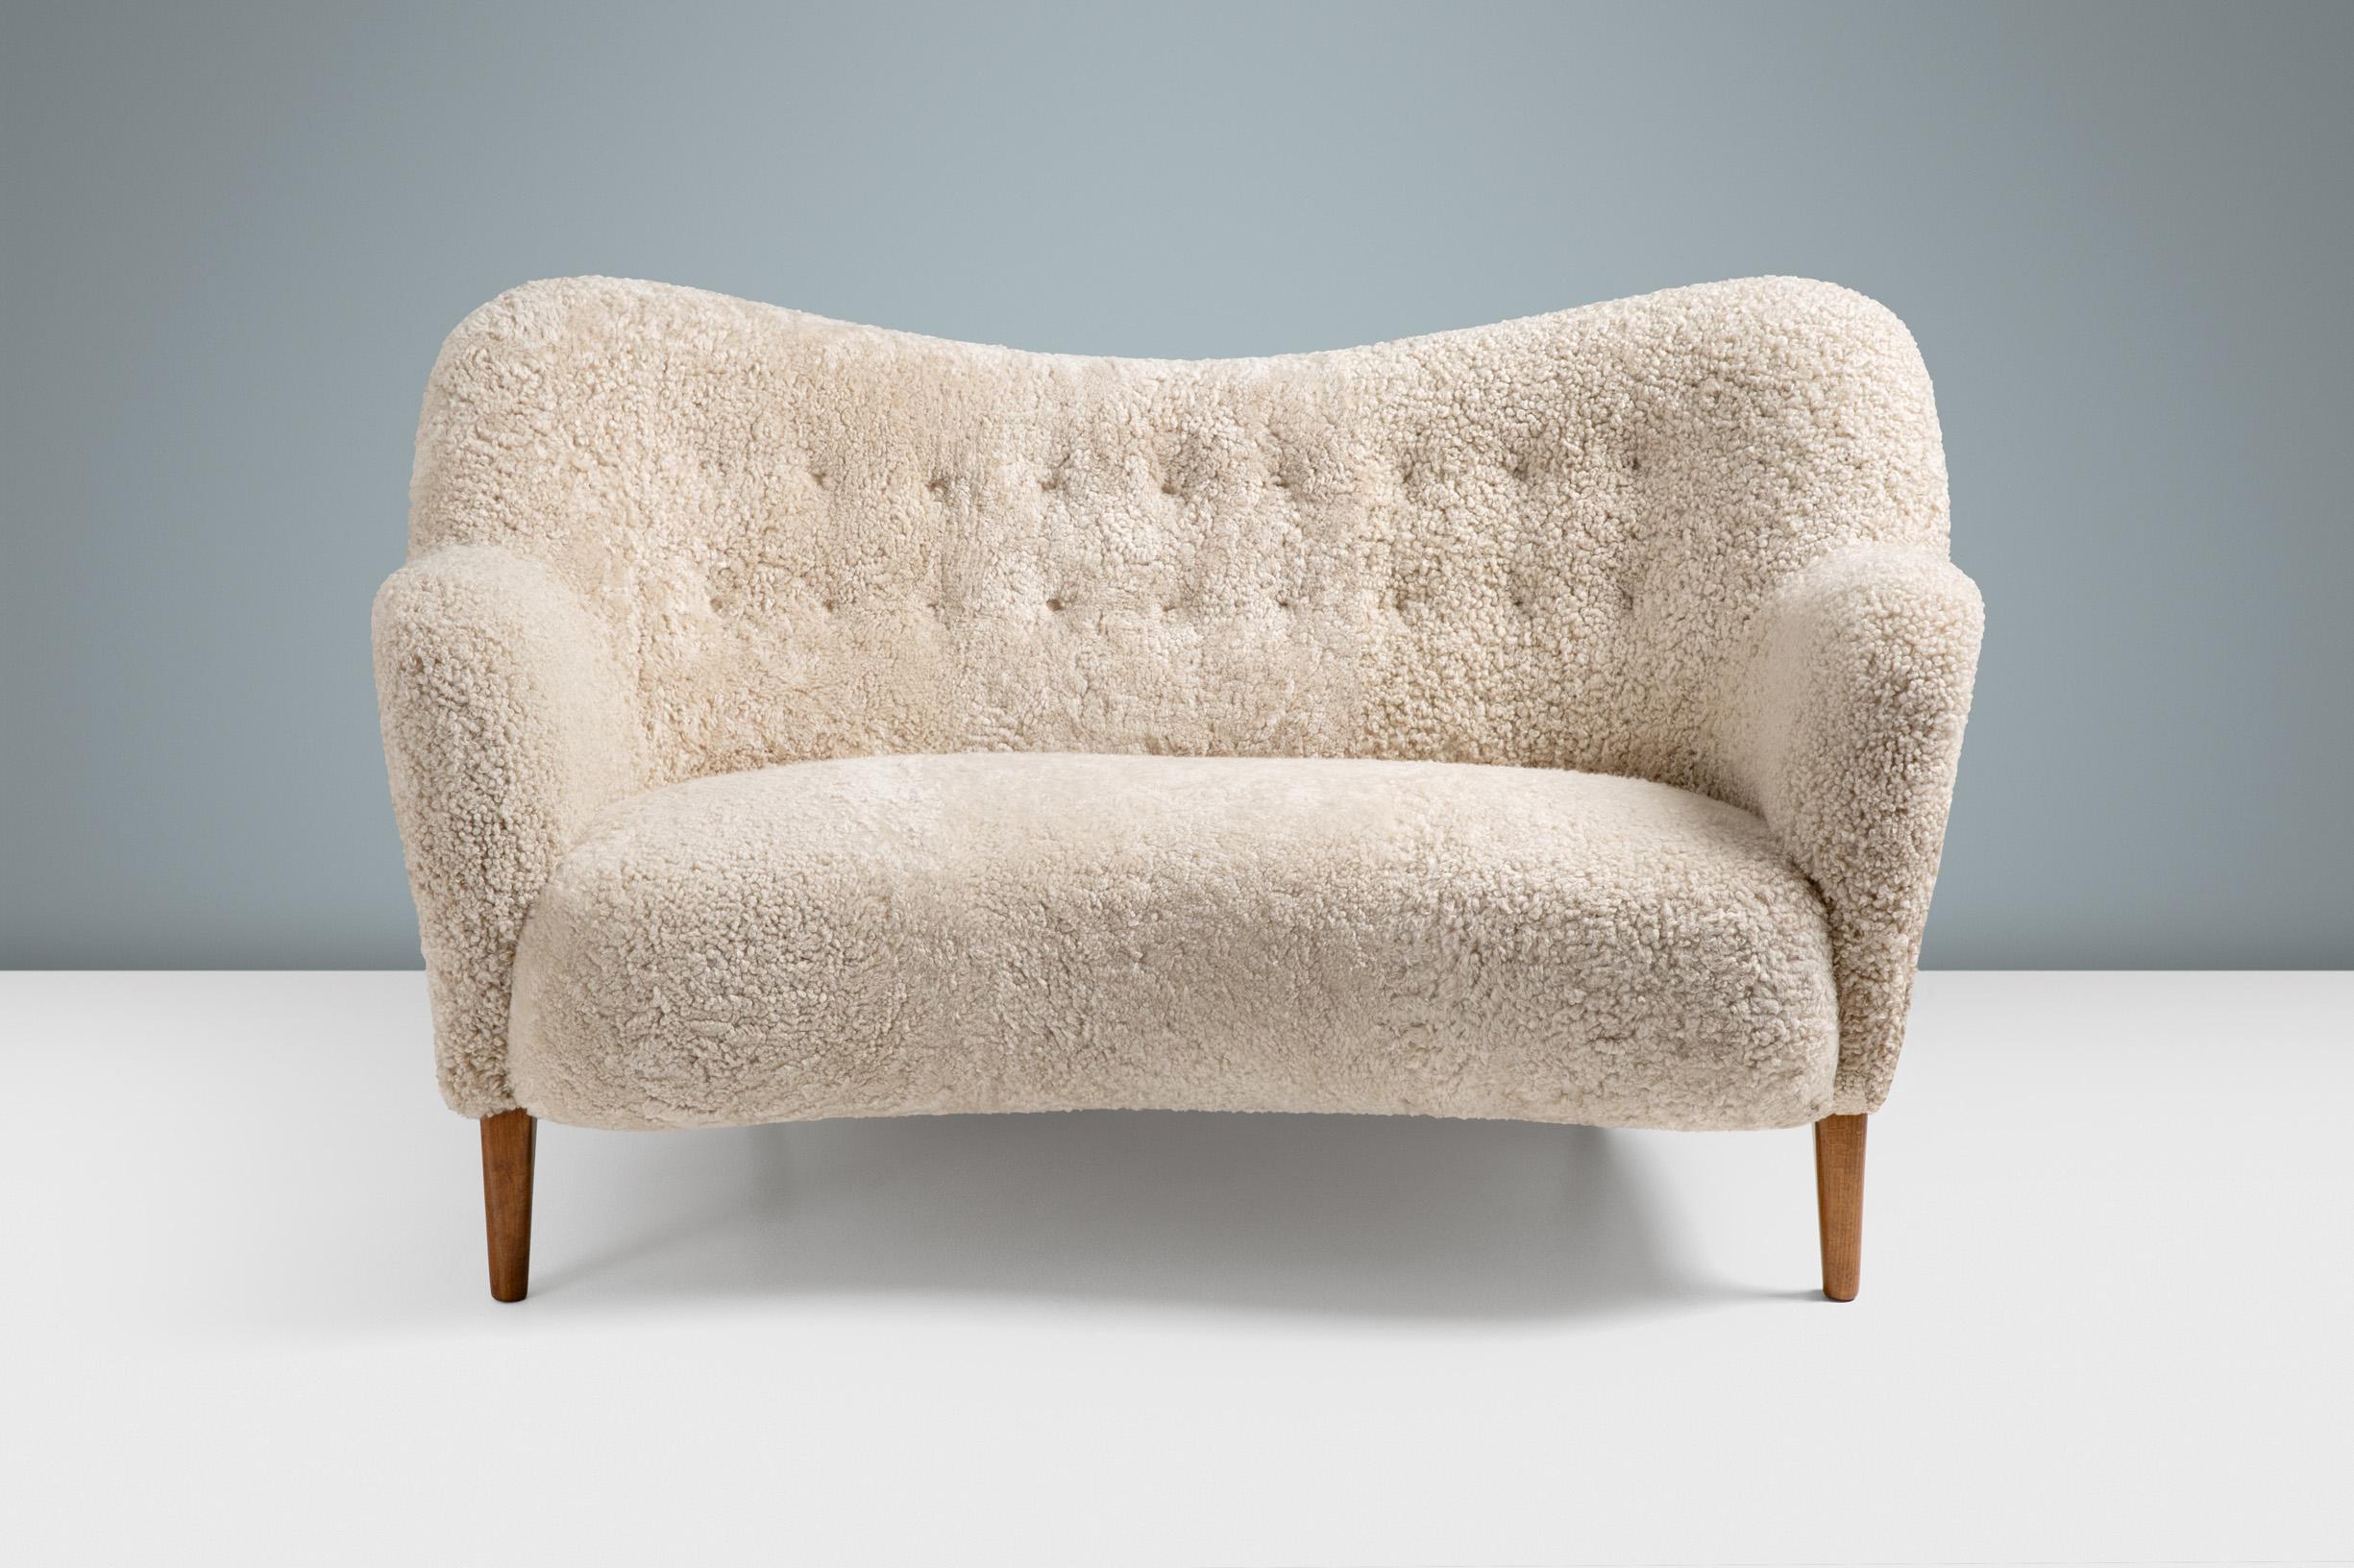 A custom-made new edition of this classic love-seat sofa by Danish designer and cabinetmaker: Alfred Kristensen. This re-edition is produced under license in Sweden by Dagmar and available to order in a range of upholstery and wood finishes.